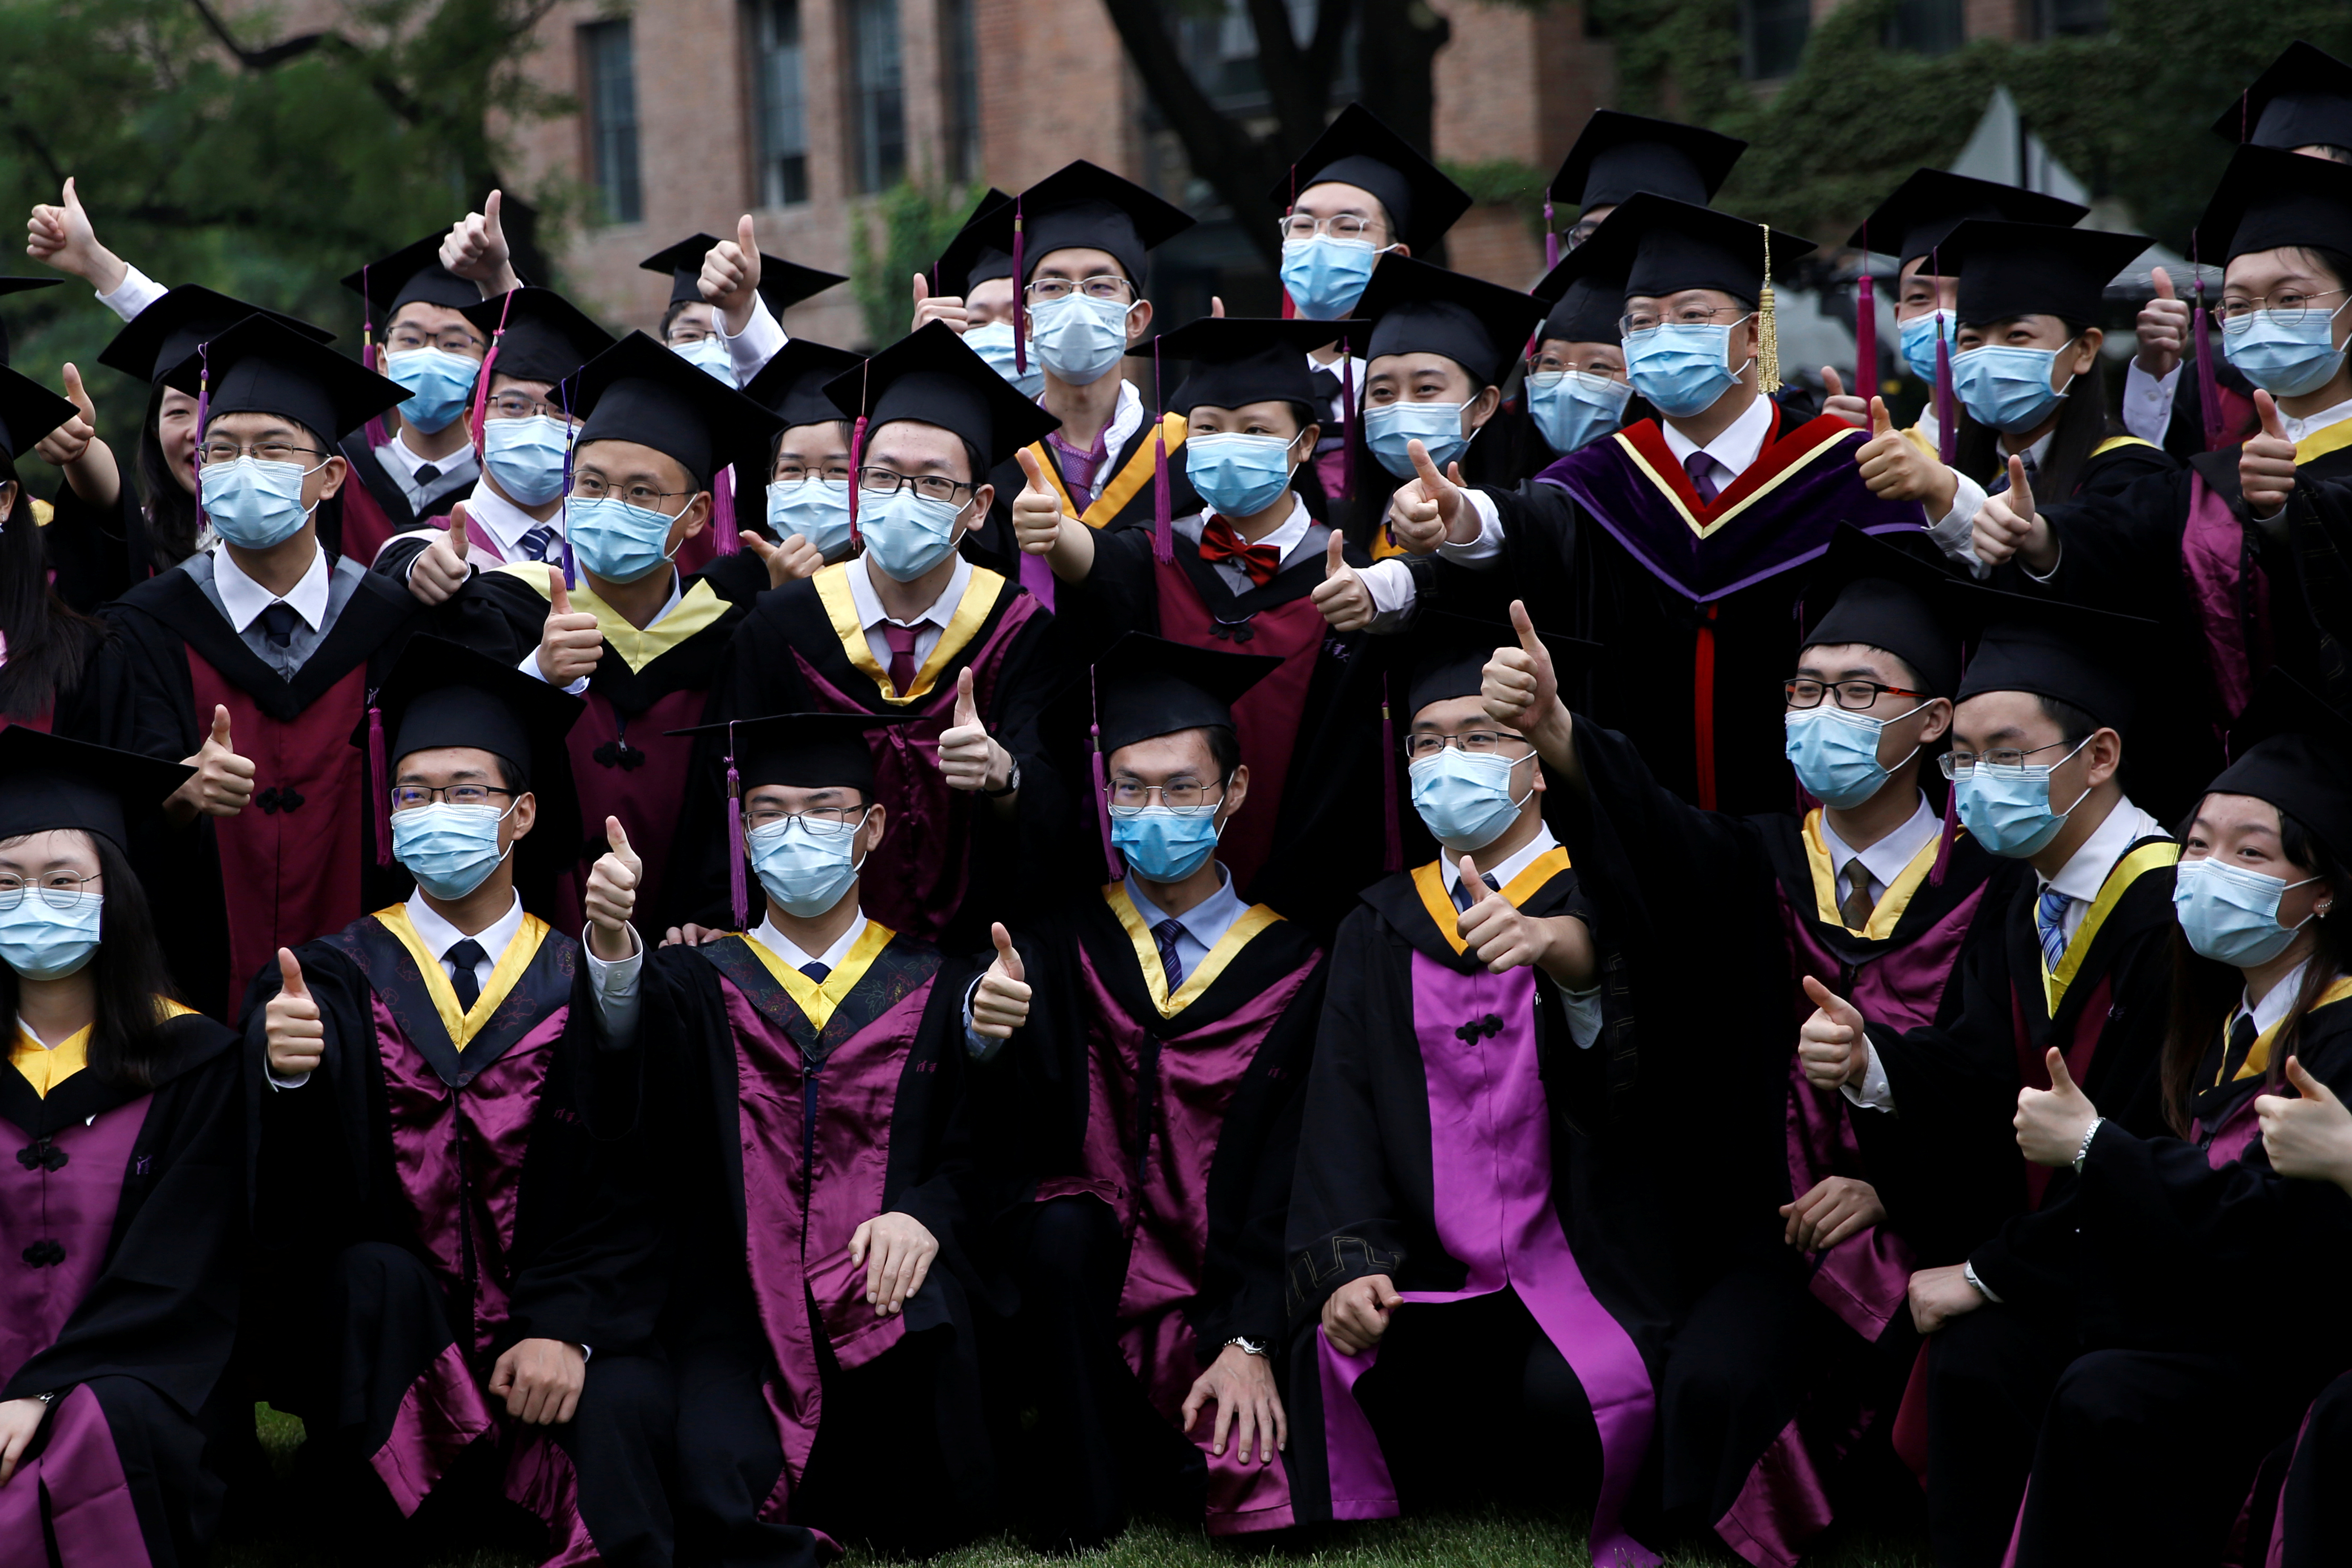 Undergraduate students take pictures while attending a graduation ceremony at Tsinghua University, June 23, 2020. (REUTERS/Tingshu Wang)